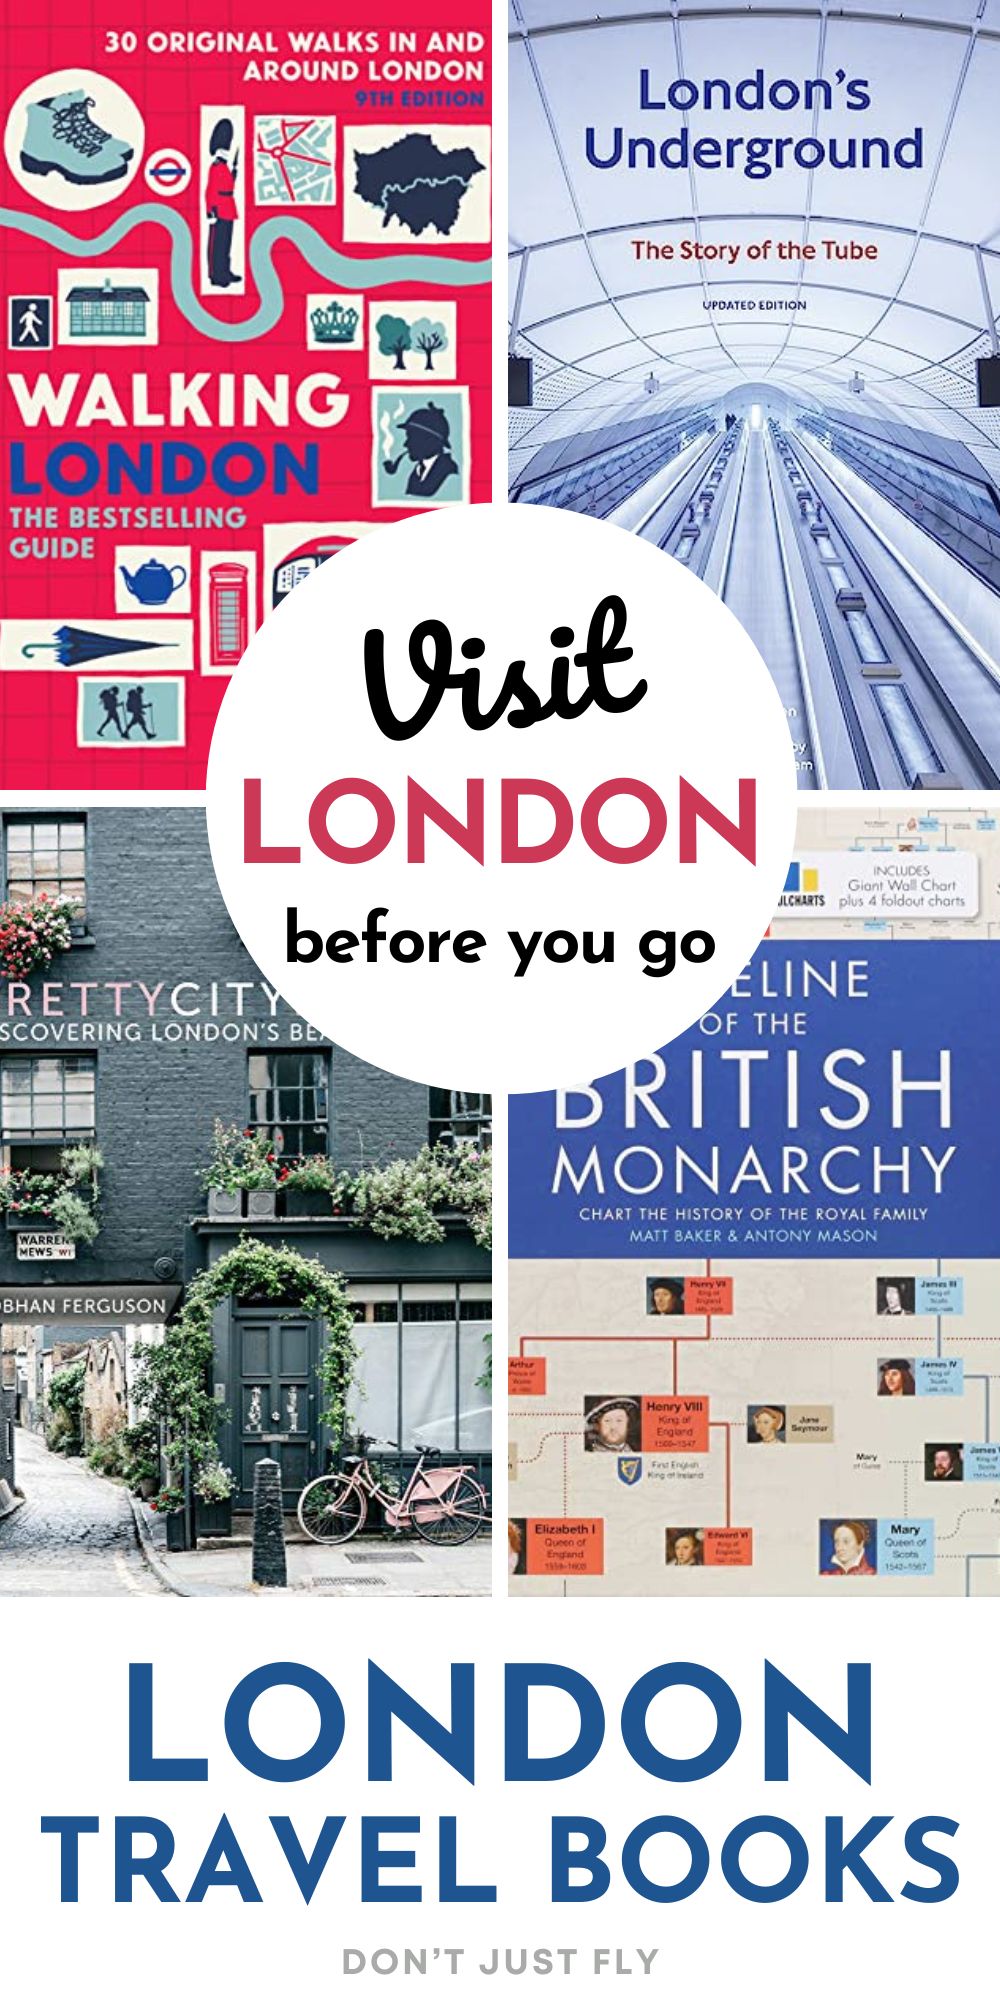 The photo collage shows 4 book covers about london.